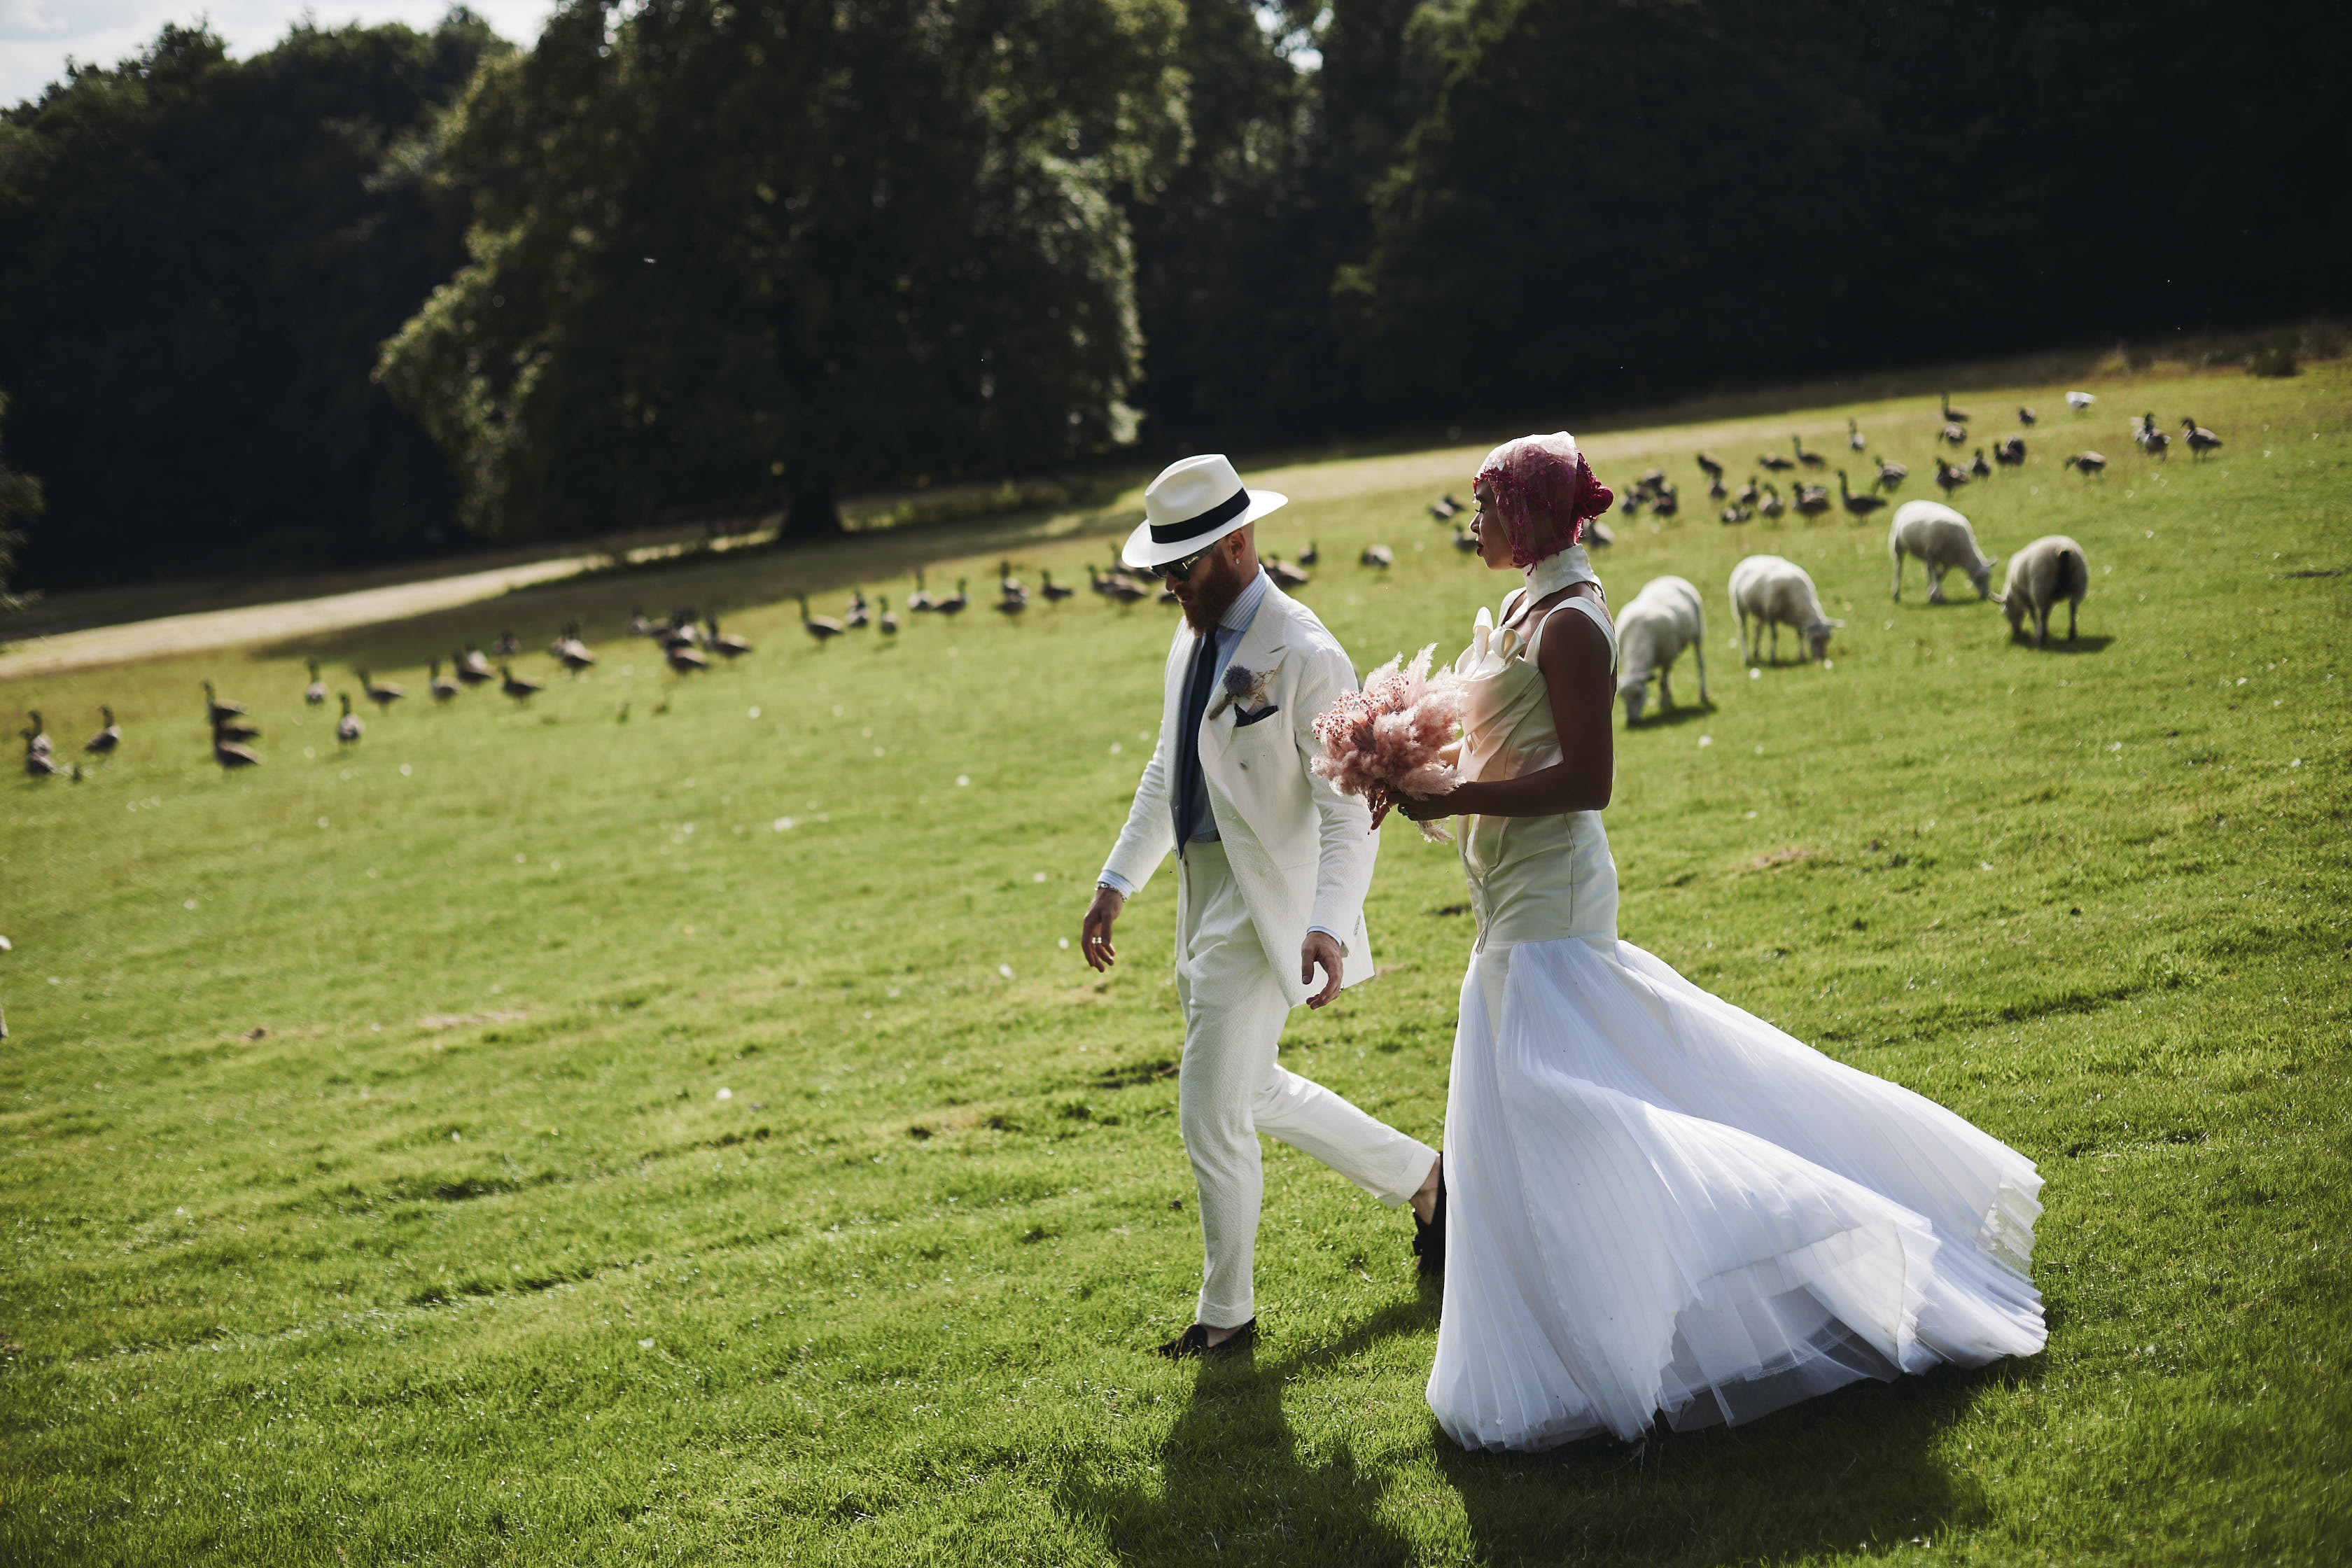 A bride and groom, wearing a long white dress and white suit, walking outdoors through a field of sheep and geese